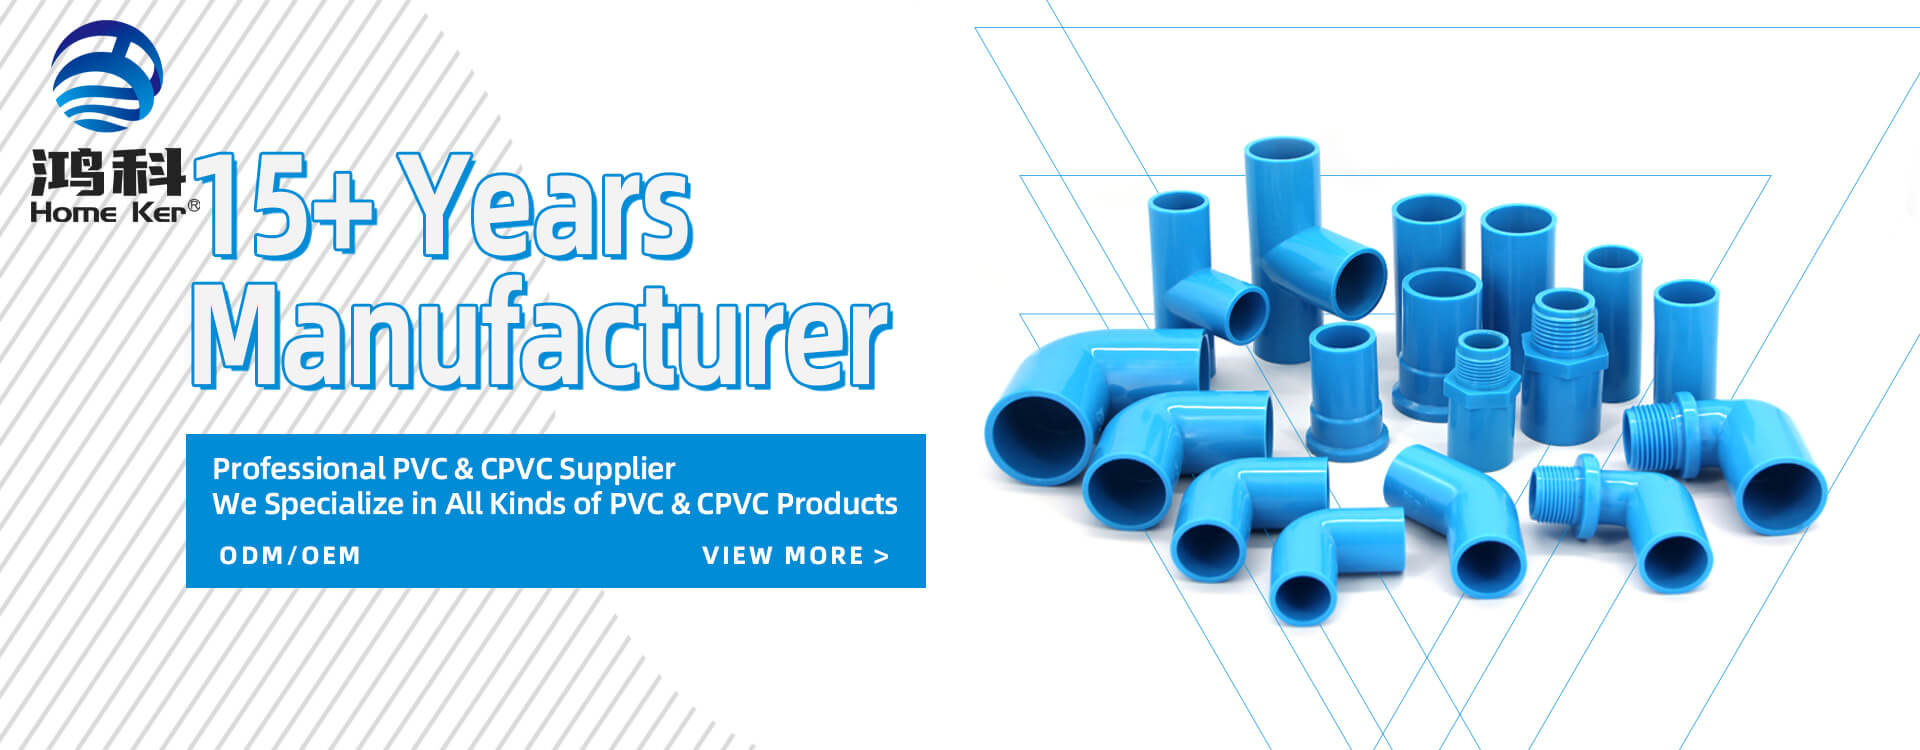 PVC pipe fittings manufacturers looking for Purchasing